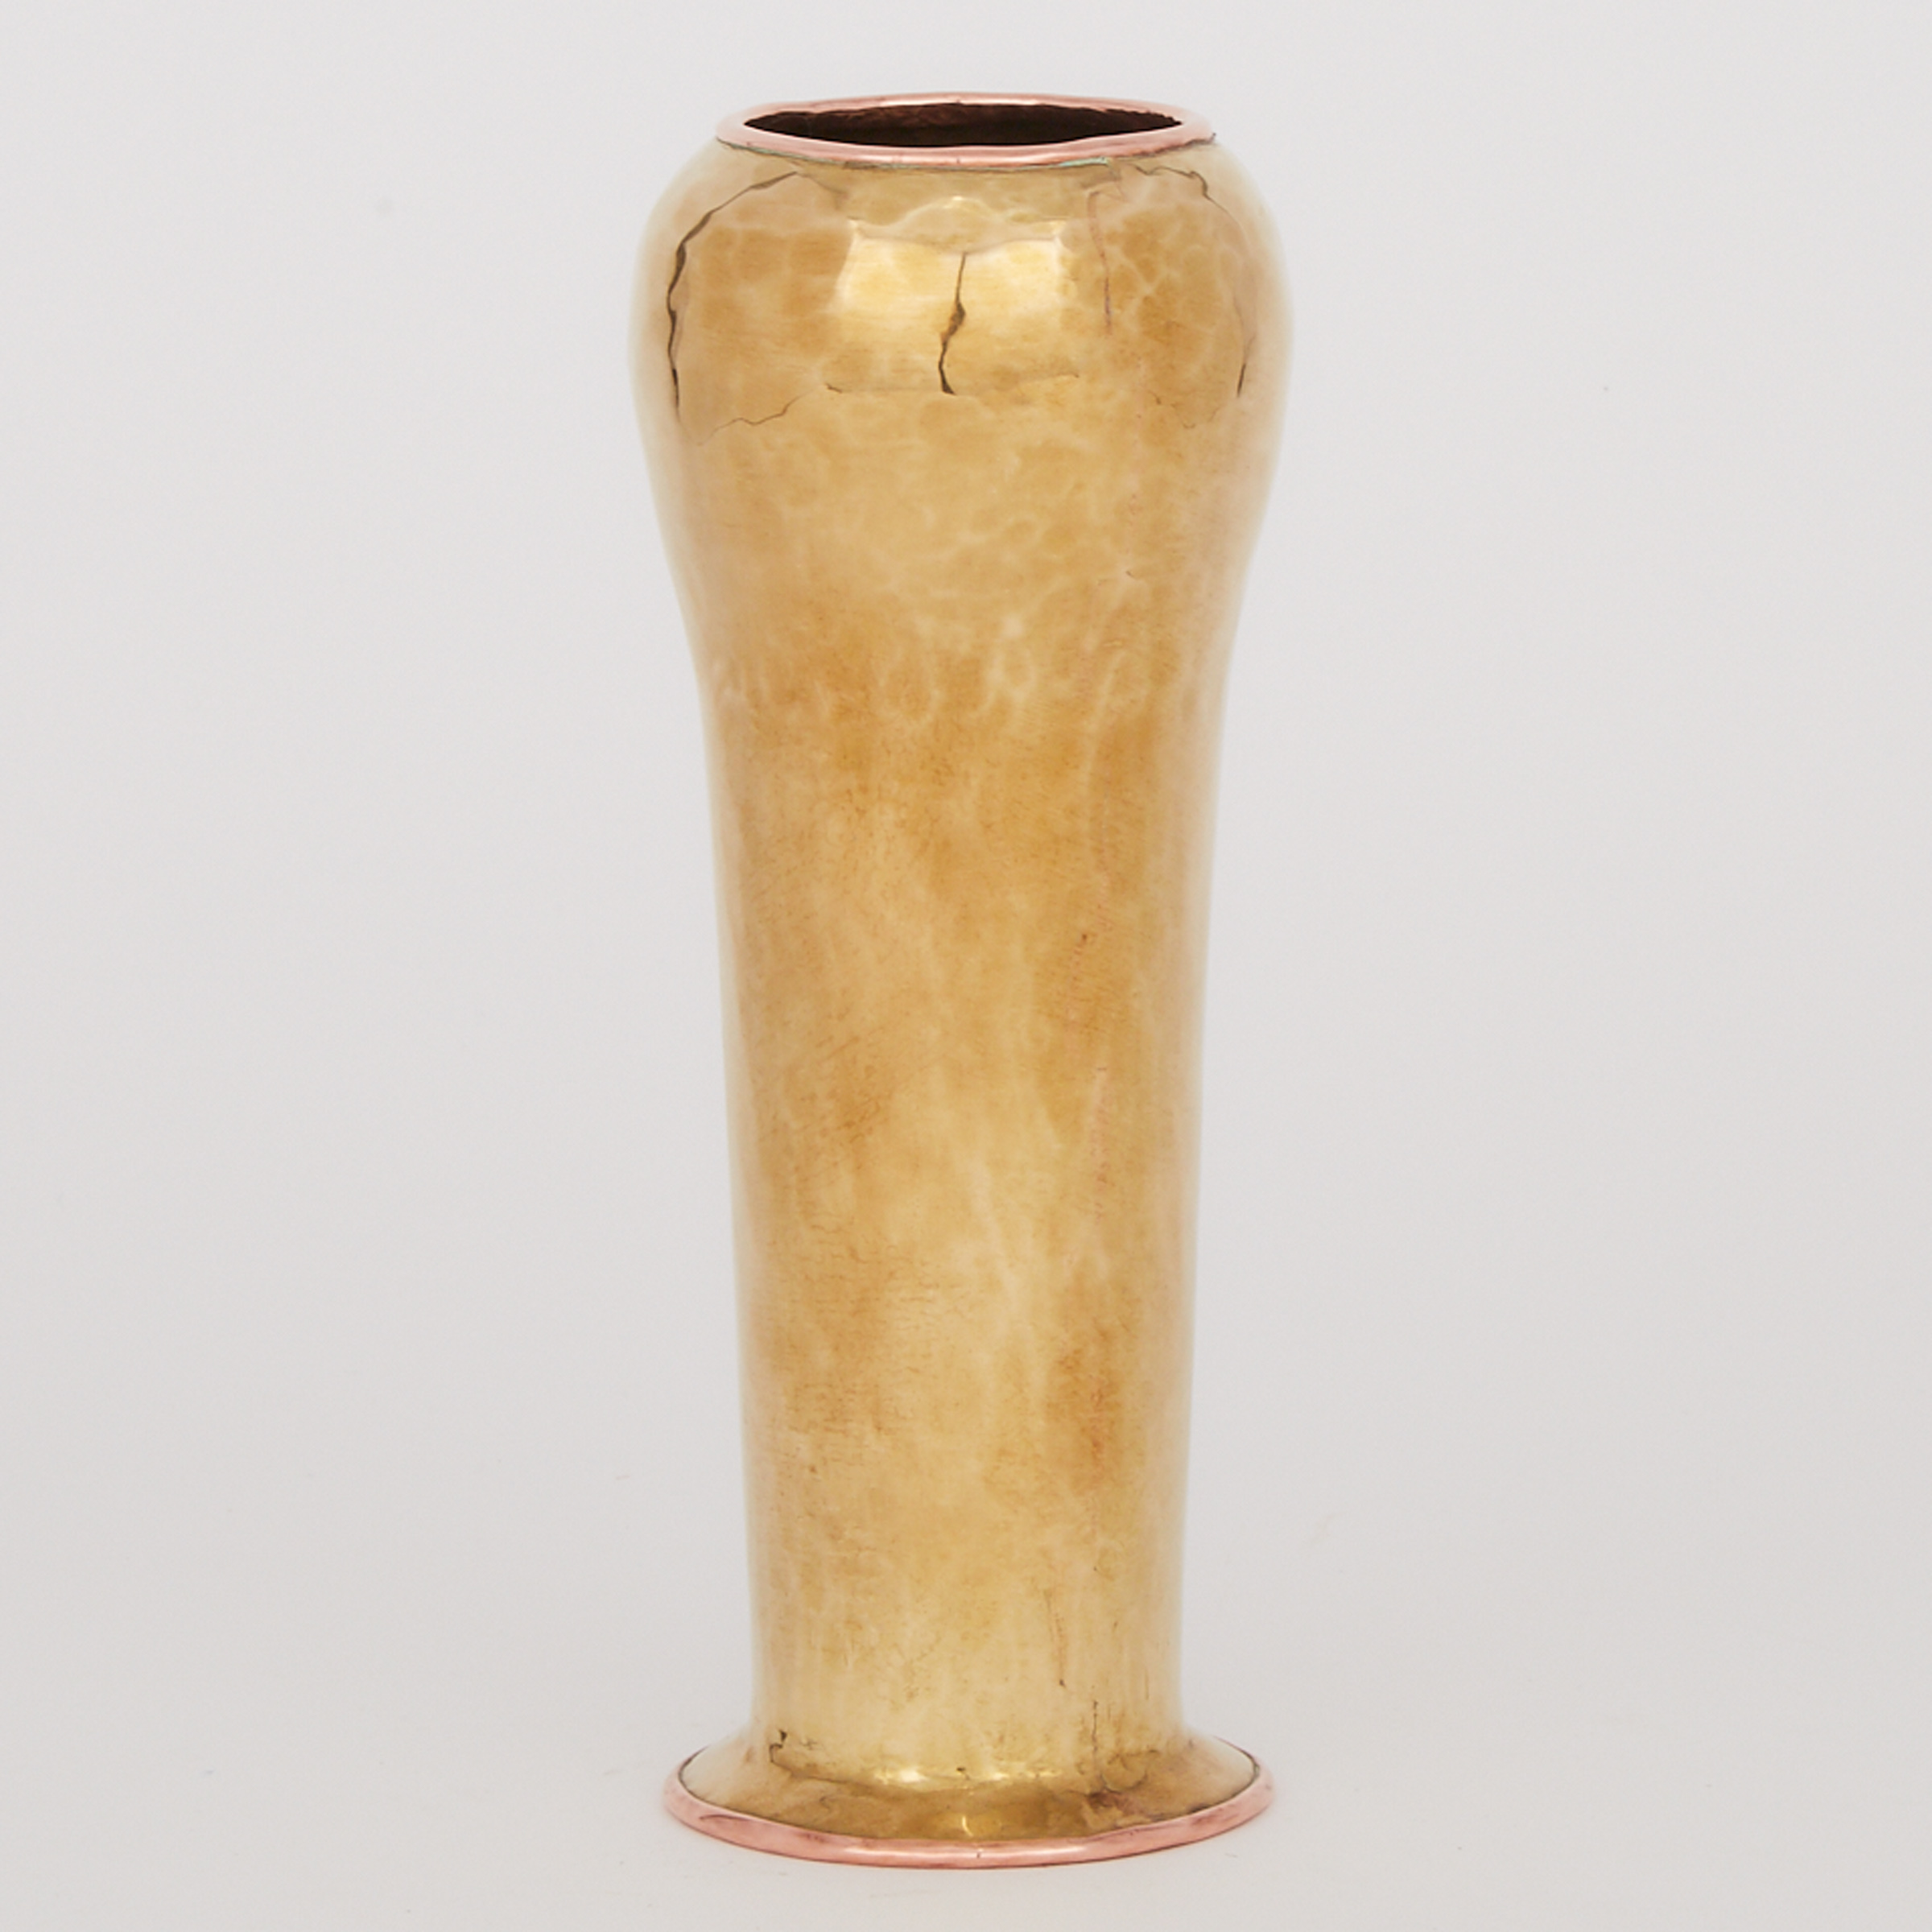 Paul Beau (Canadian, 1871-1941) Copper Mounted Brass Vase, Montreal, early 20th century